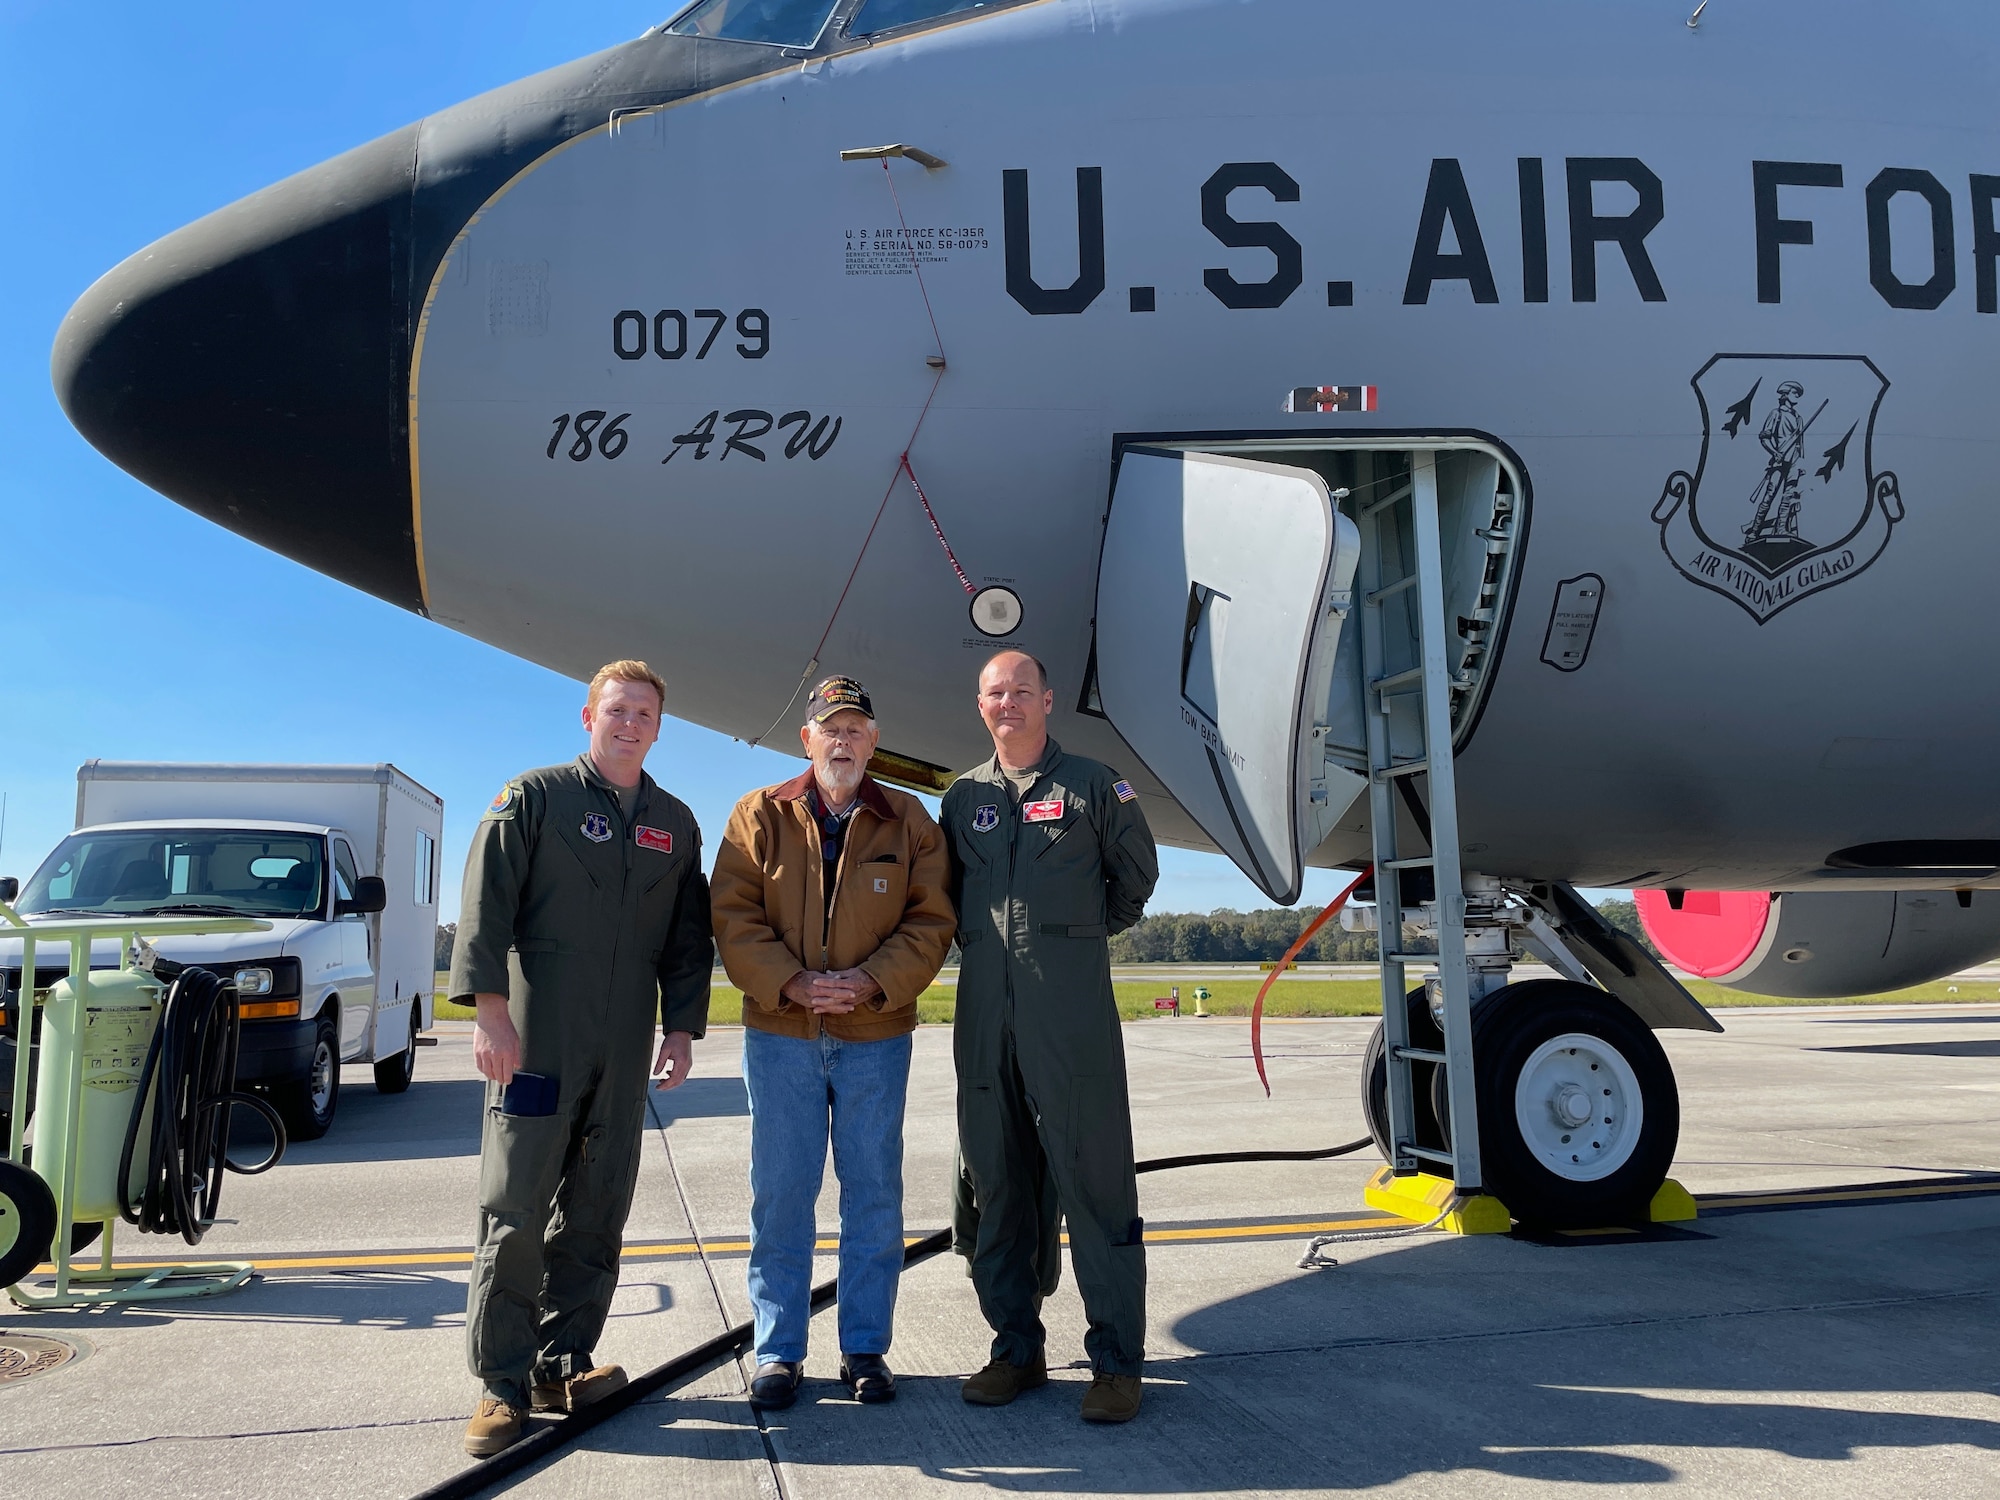 U.S. Air Force Tech. Sgt. Joshua Schultz, a boom operator, and Lt. Col. Brad Anthony, a KC-135R pilot, who are both with the 153rd Air Refueling Squadron, stand with Vietnam veteran James Roberts beside a KC-135R Stratotanker aircraft, Nov. 6, 2021, at Key Field Air National Guard Base, Mississippi.